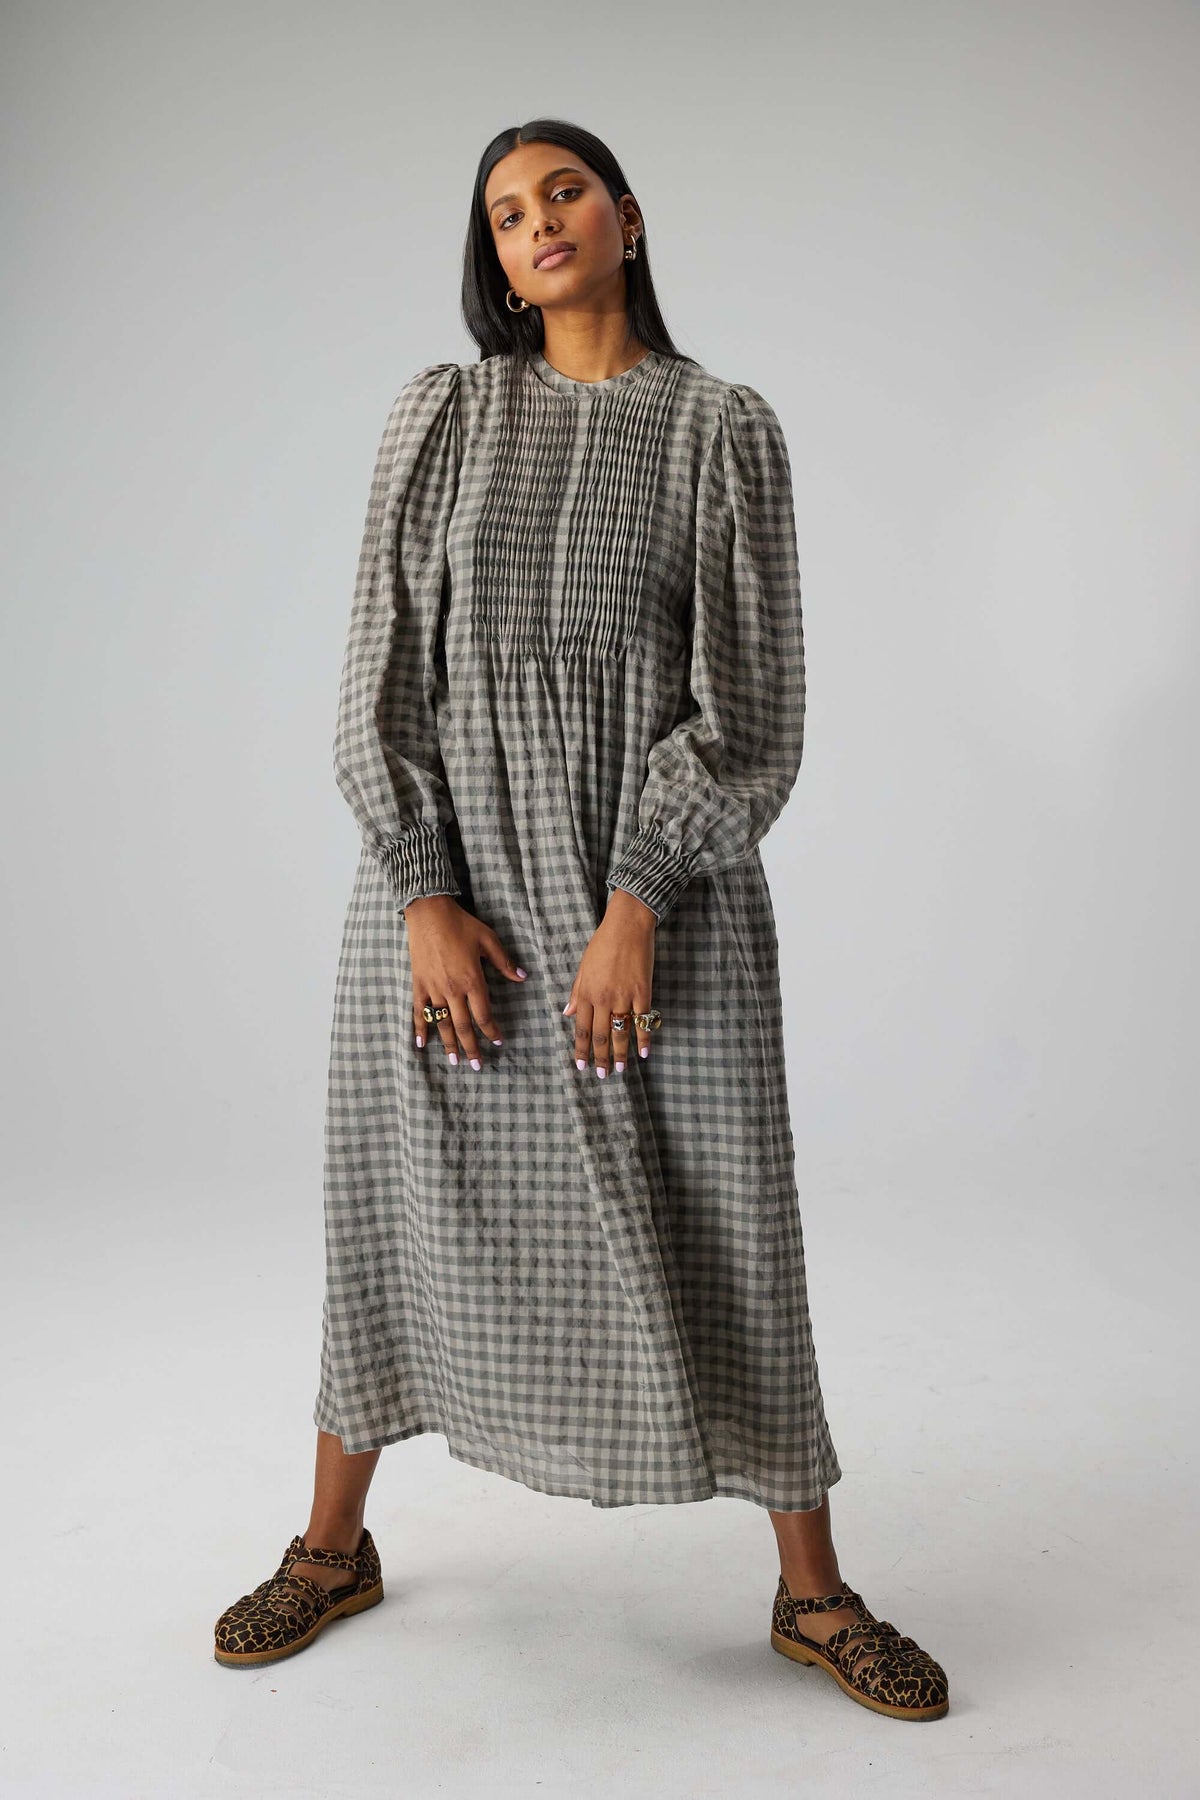 Thelma dress in Highway vichy